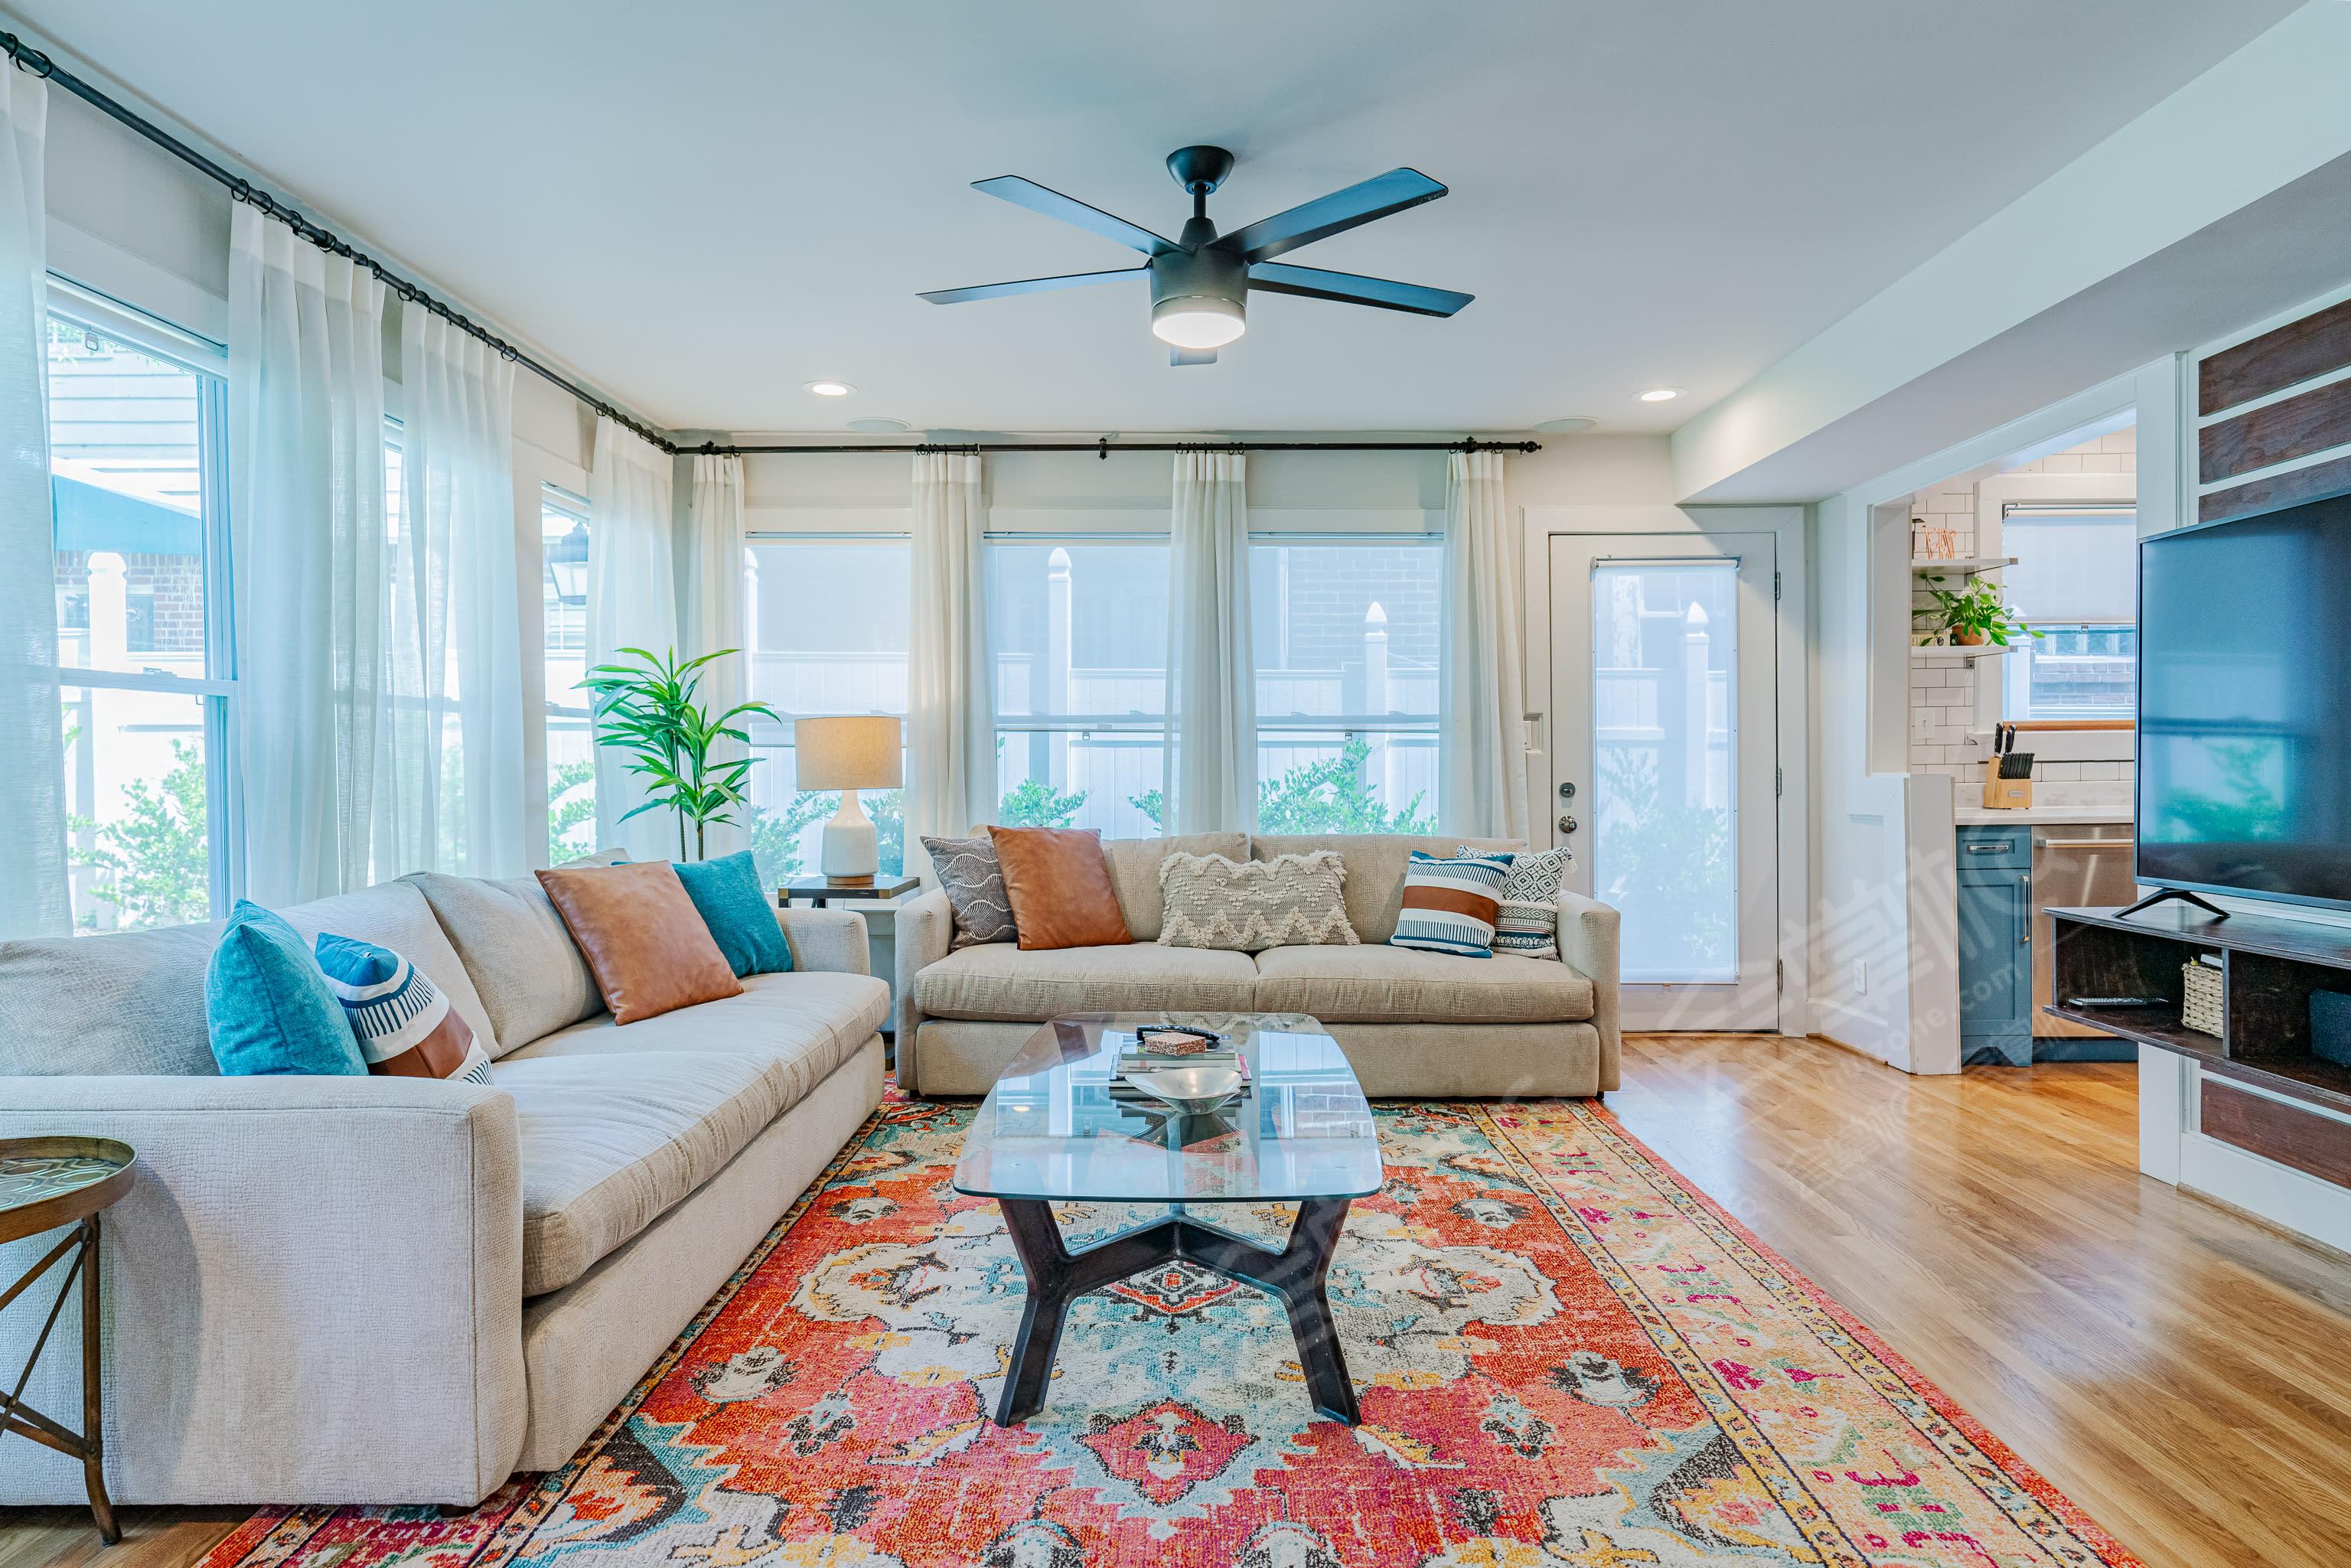 Bohemian Chic Bungalow on the Beltline near Ansley Park